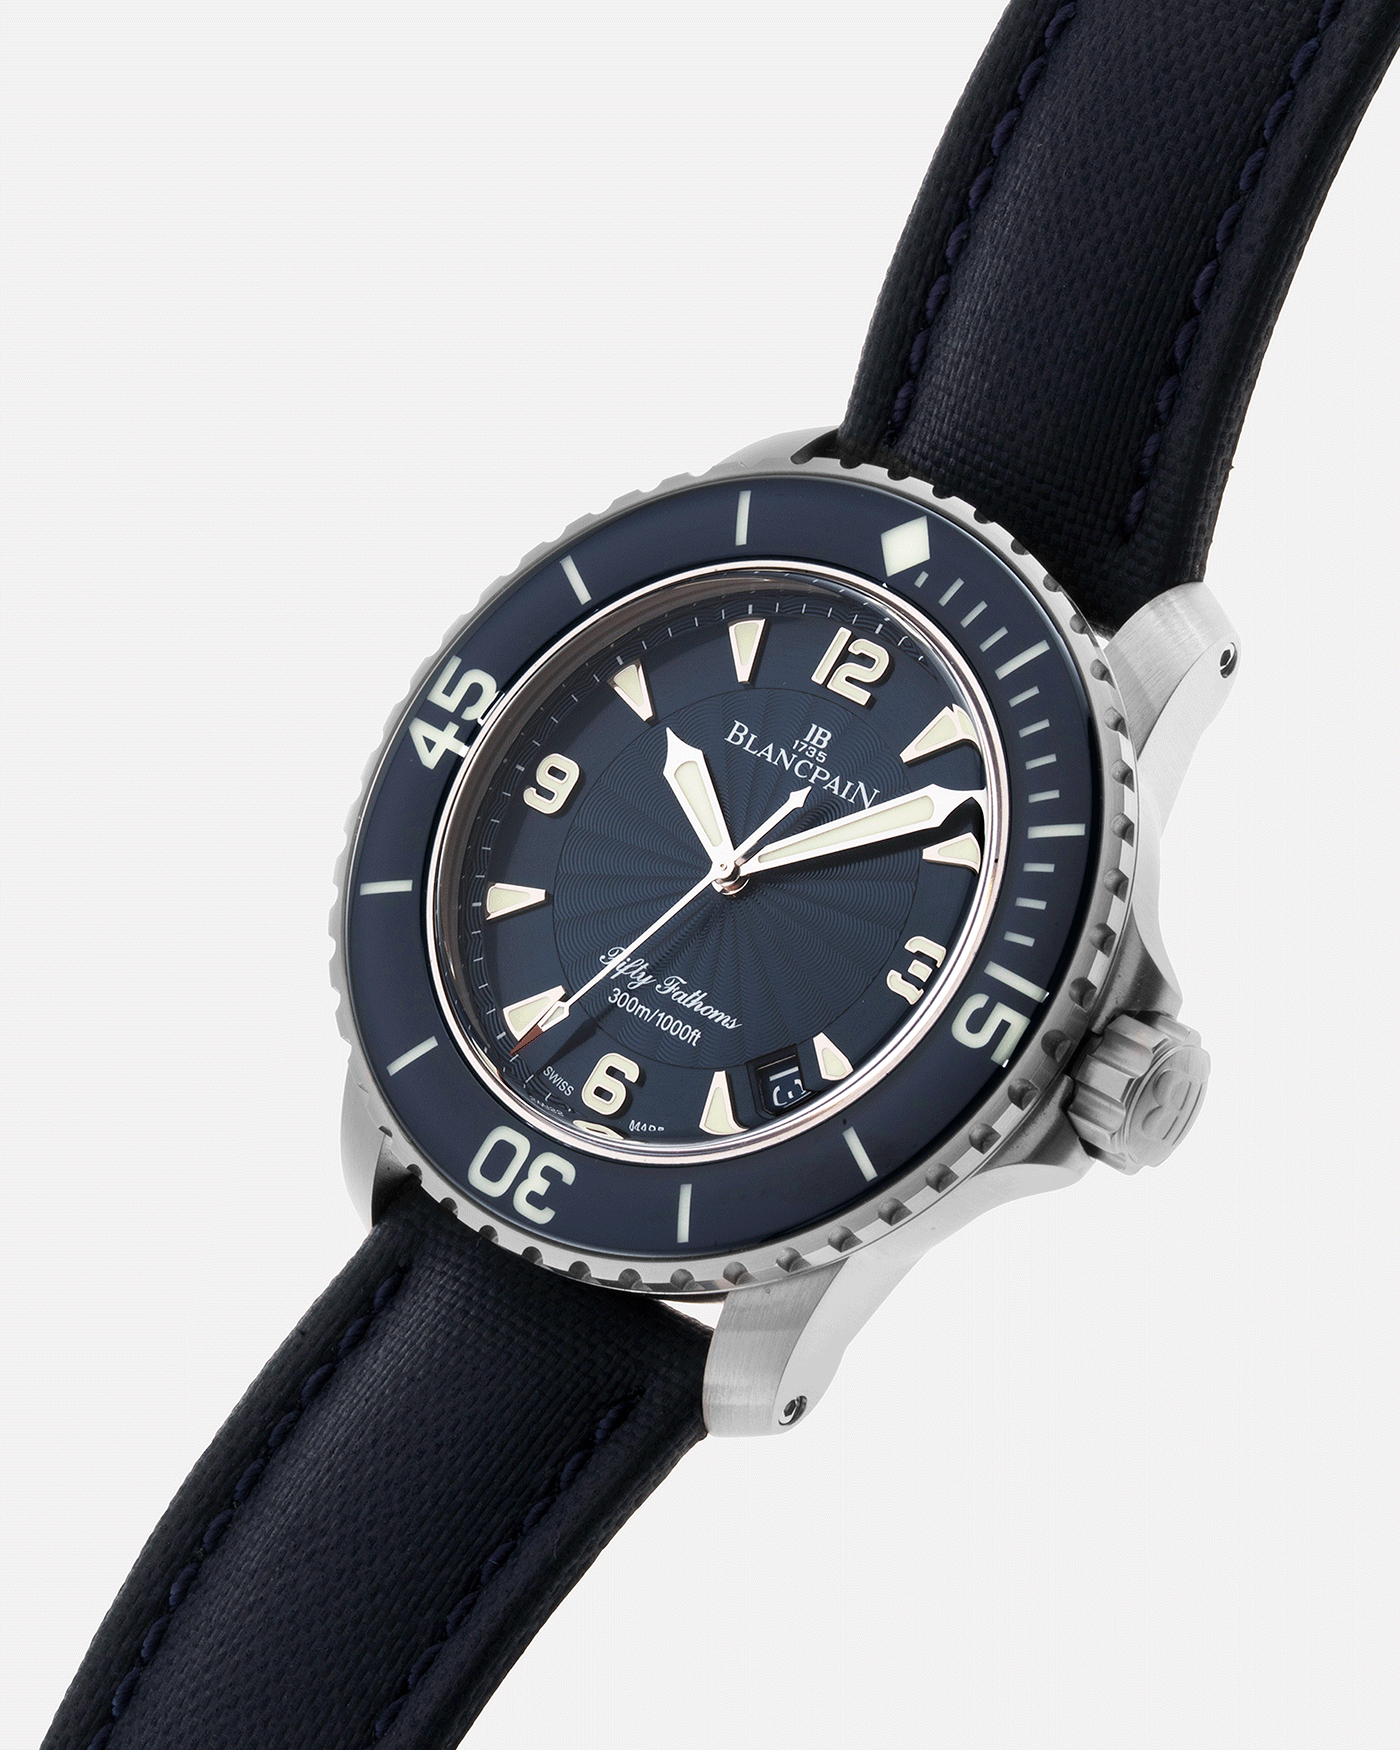 Brand: Blancpain Year: 2015 Model: Fifty Fathoms Reference Number: 5015D-1140-52B  Material: Stainless Steel Movement: Cal. 1315 Case Diameter: 45mm Bracelet/Strap: Blancpain Blue Rubberised Sailcloth Strap